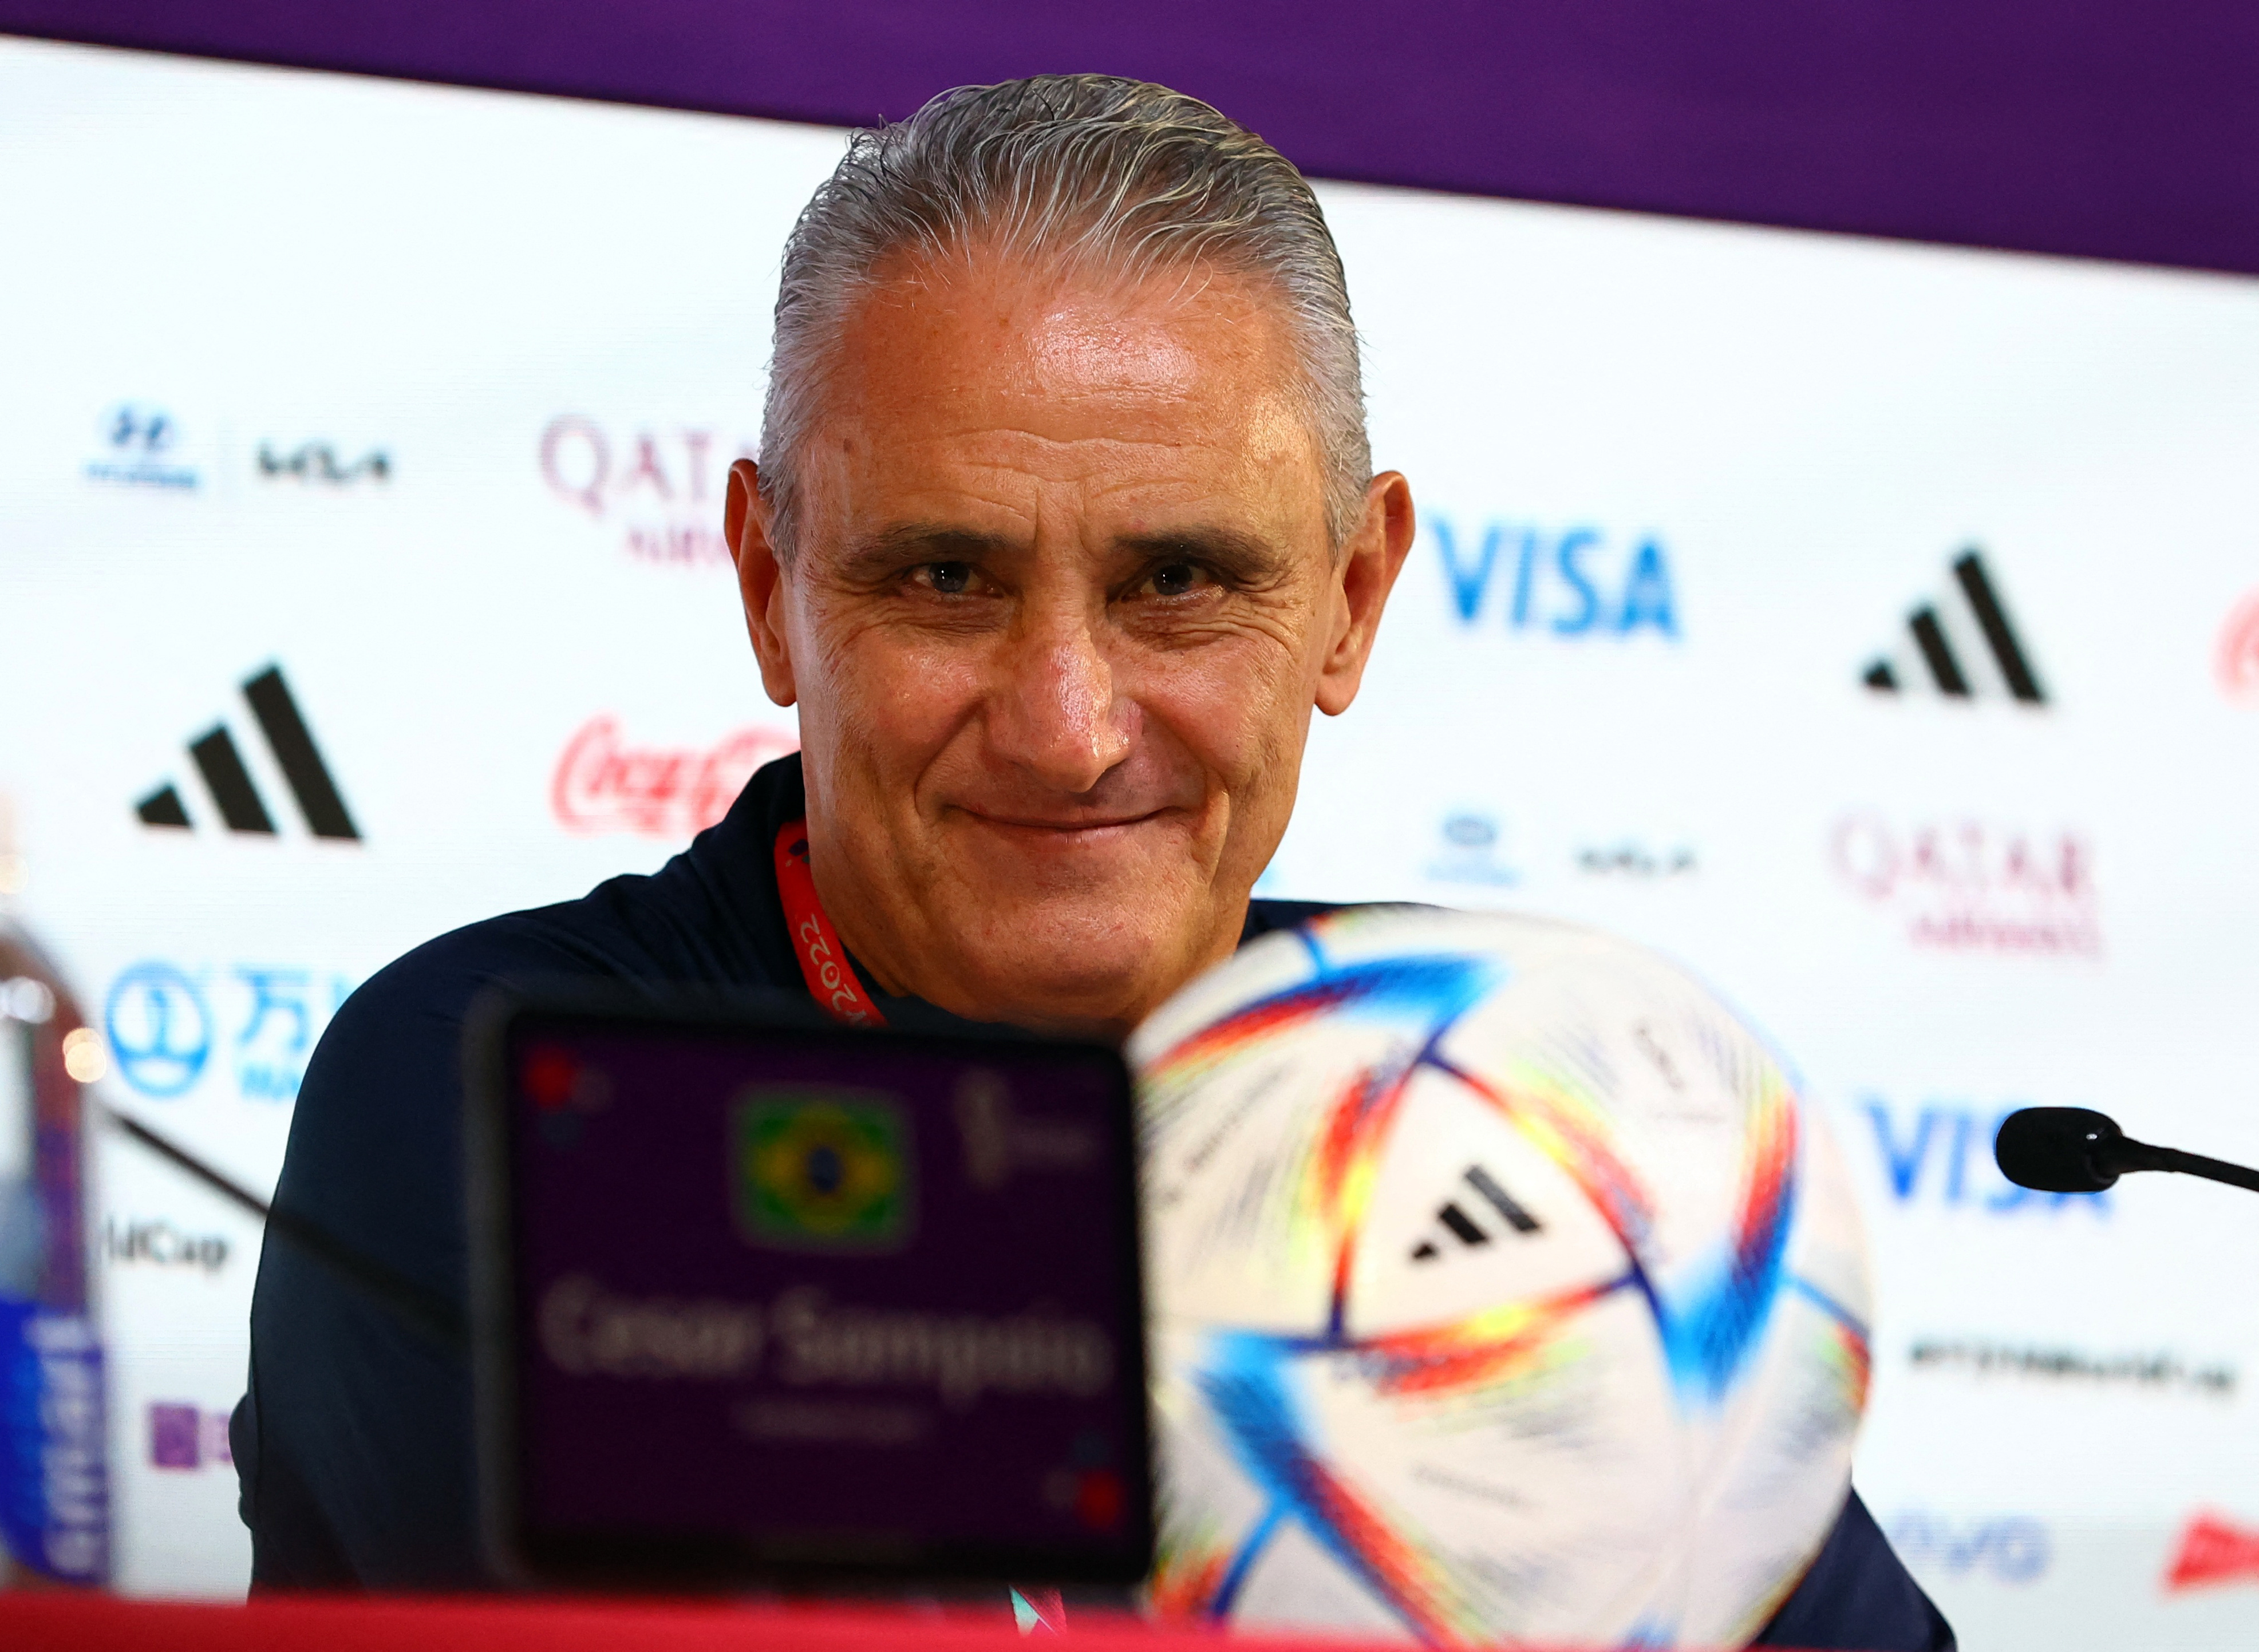 Soccer Football - FIFA World Cup Qatar 2022 - Brazil Press Conference - Main Media Center, Doha, Qatar - December 4, 2022 Brazil coach Tite during the press conference REUTERS/Gareth Bumstead